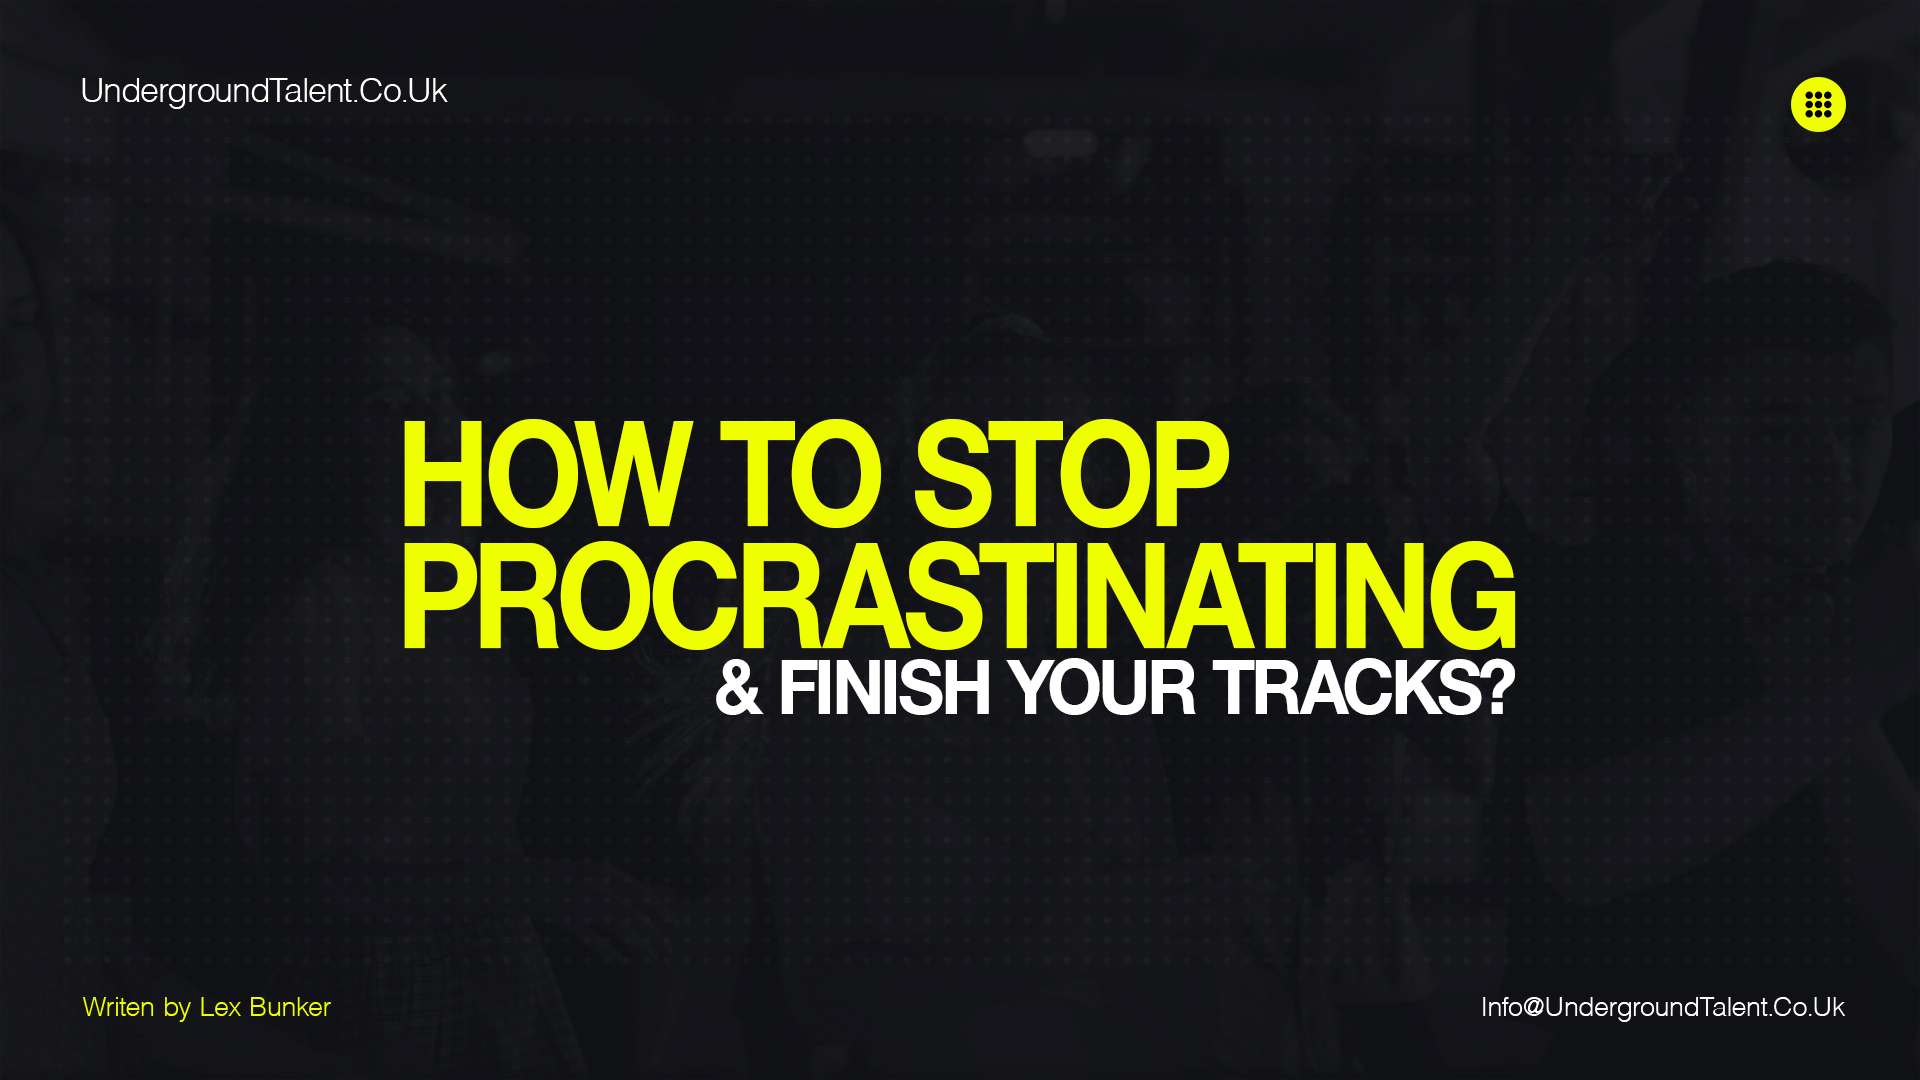 How to Stop Procrastinating & Finish Your Tracks?